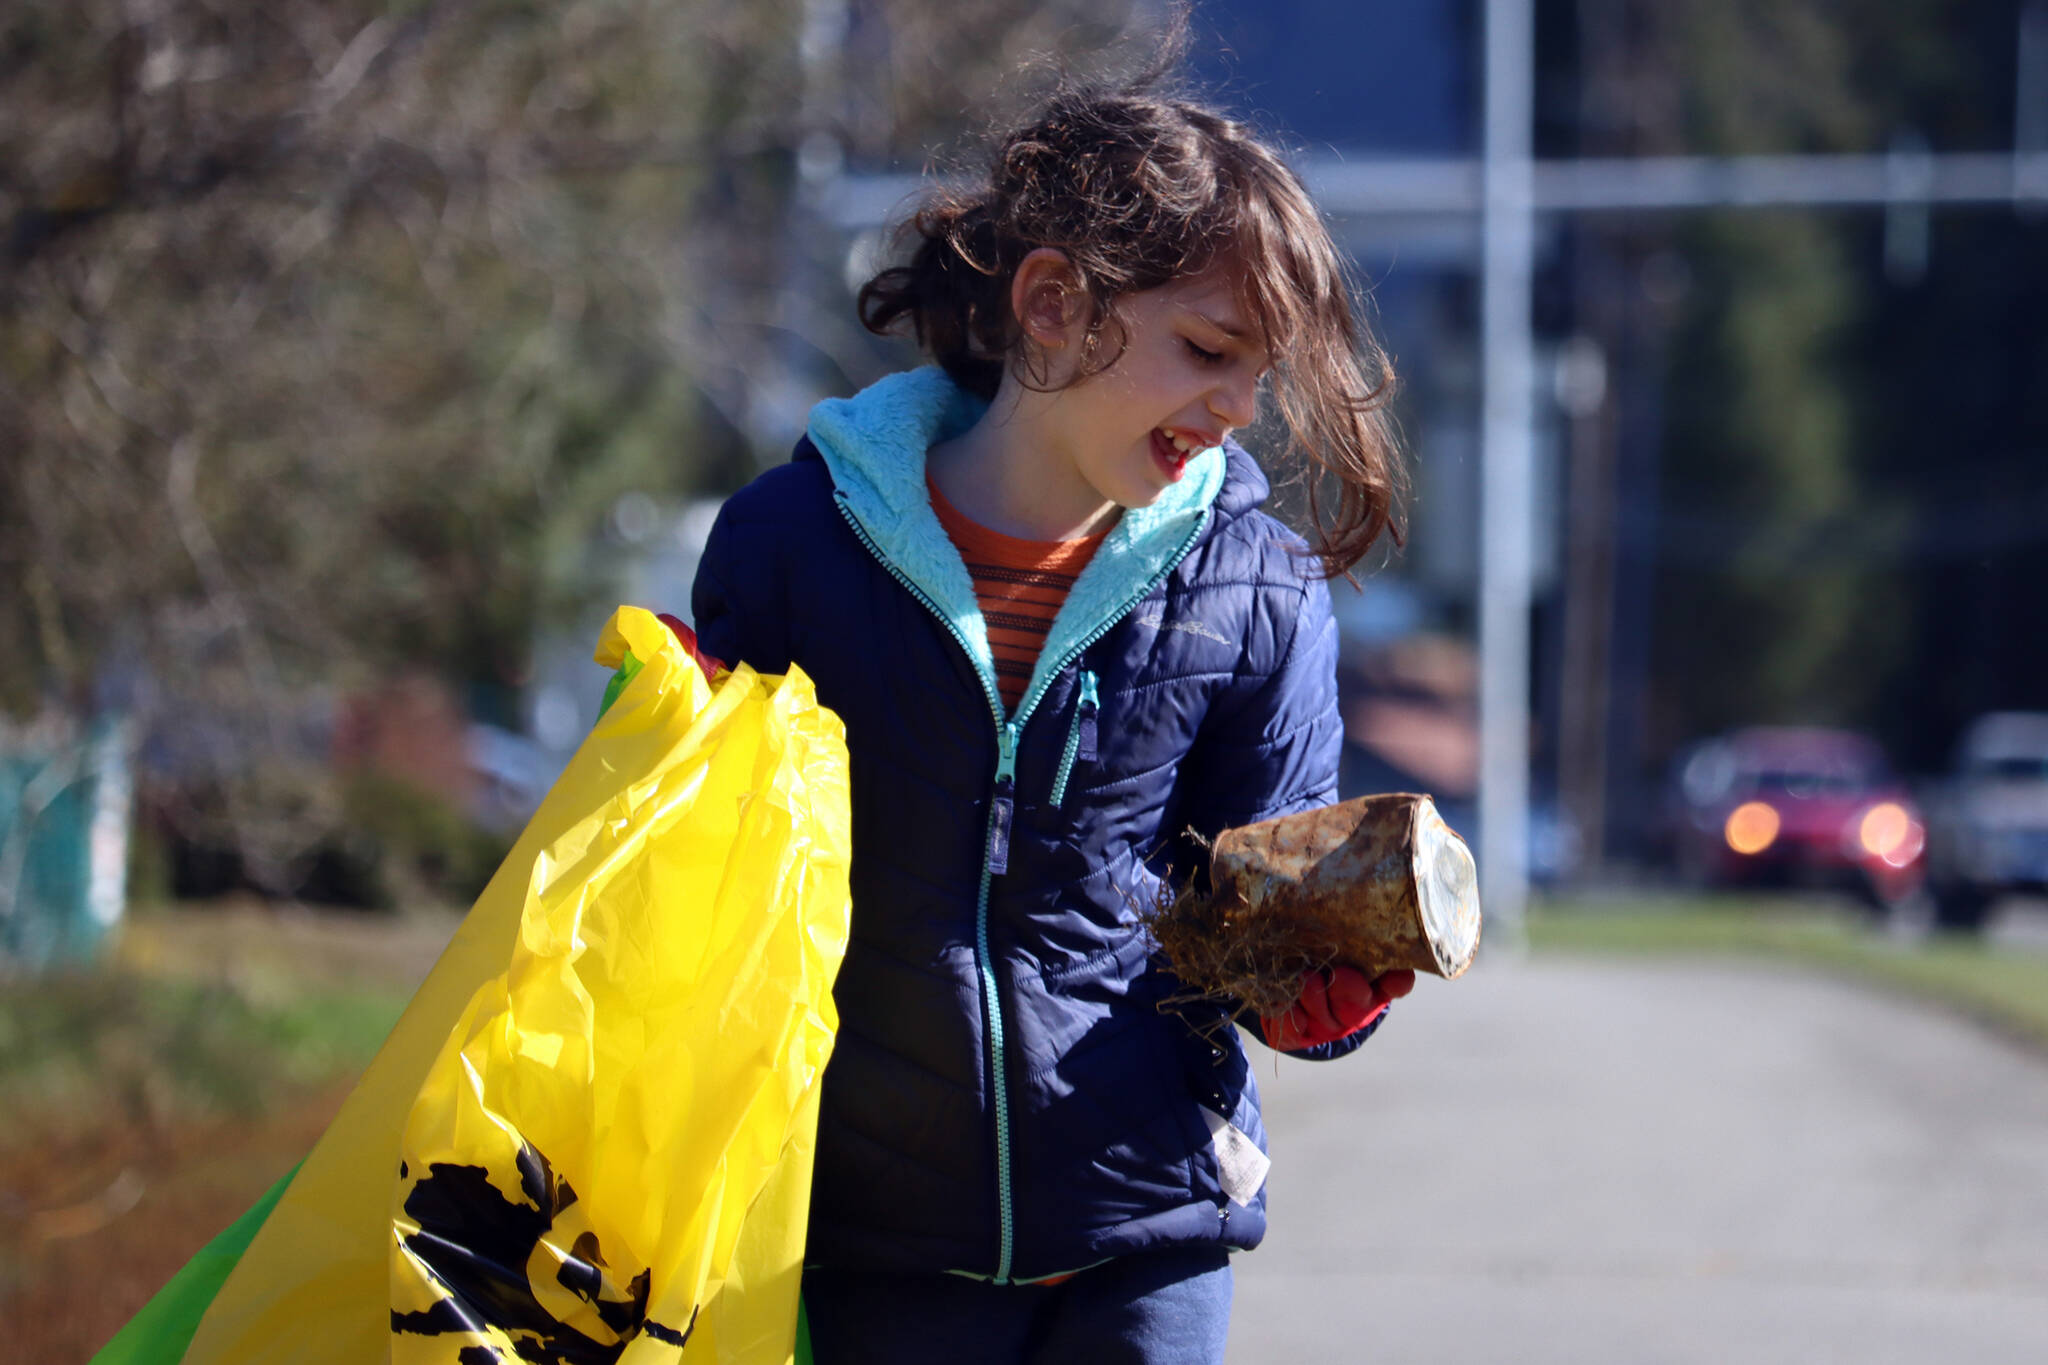 Gerald Thill, 7, inspects a weathered can before placing it in a litter bag on Saturday during the citywide cleanup. (Ben Hohenstatt / Juneau Empire)